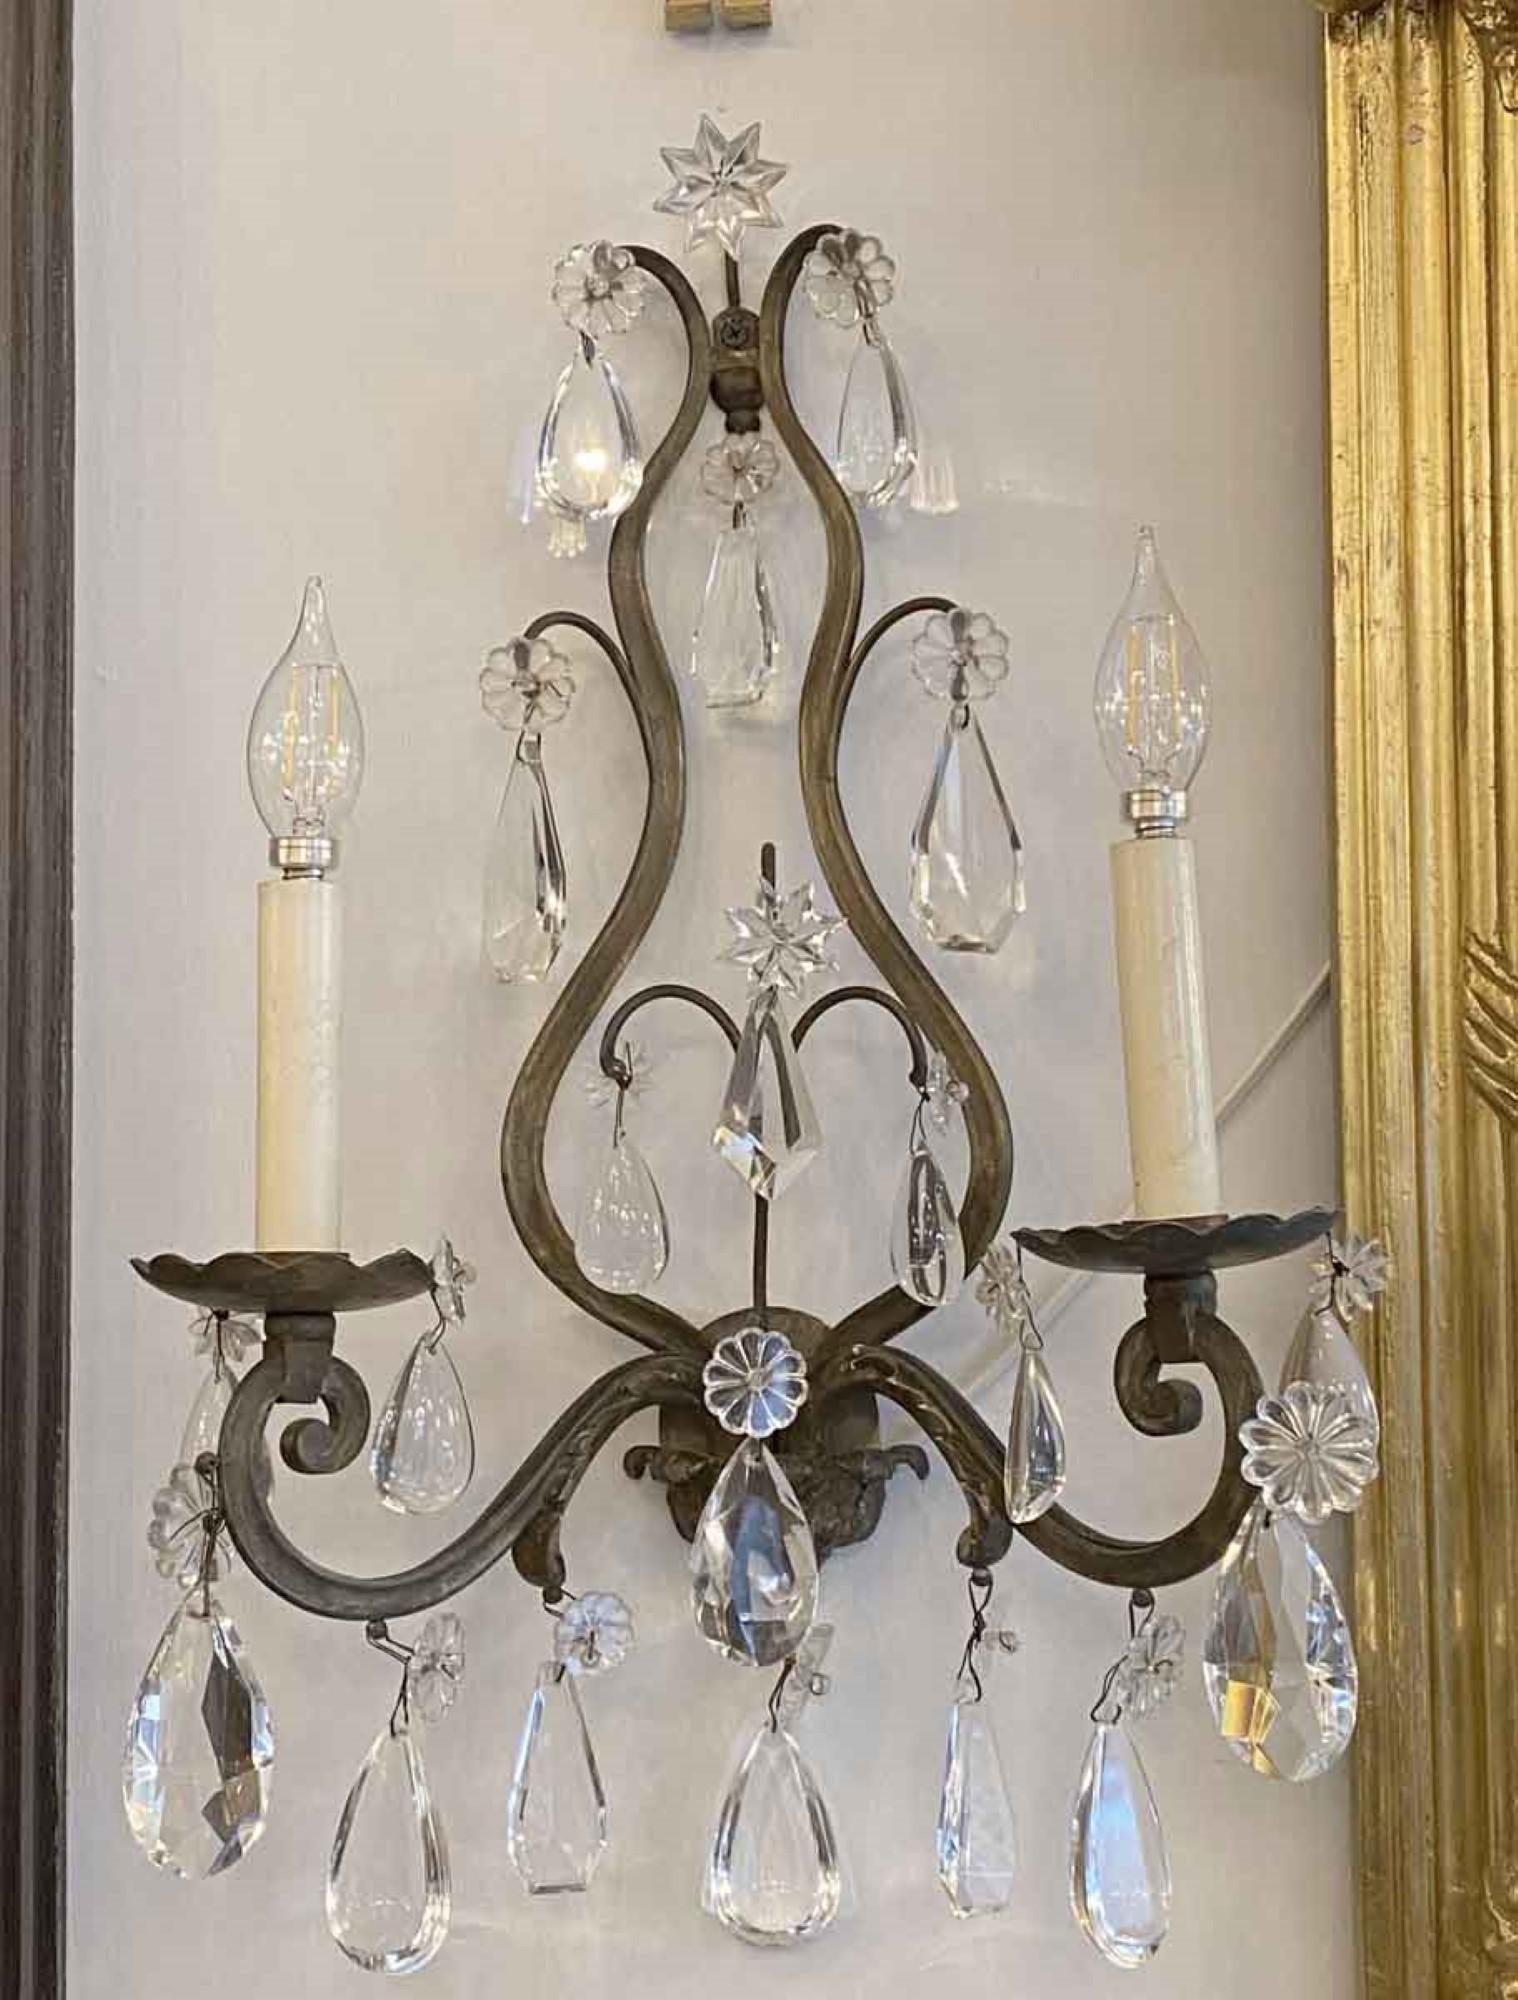 Here is a pair of 1920s French antique wall sconces in bronze and a pleasing assortment of complementary crystals. They each have two lights, and use candelabra bulbs. There are various shaped crystals, of which all have a small flower or star at